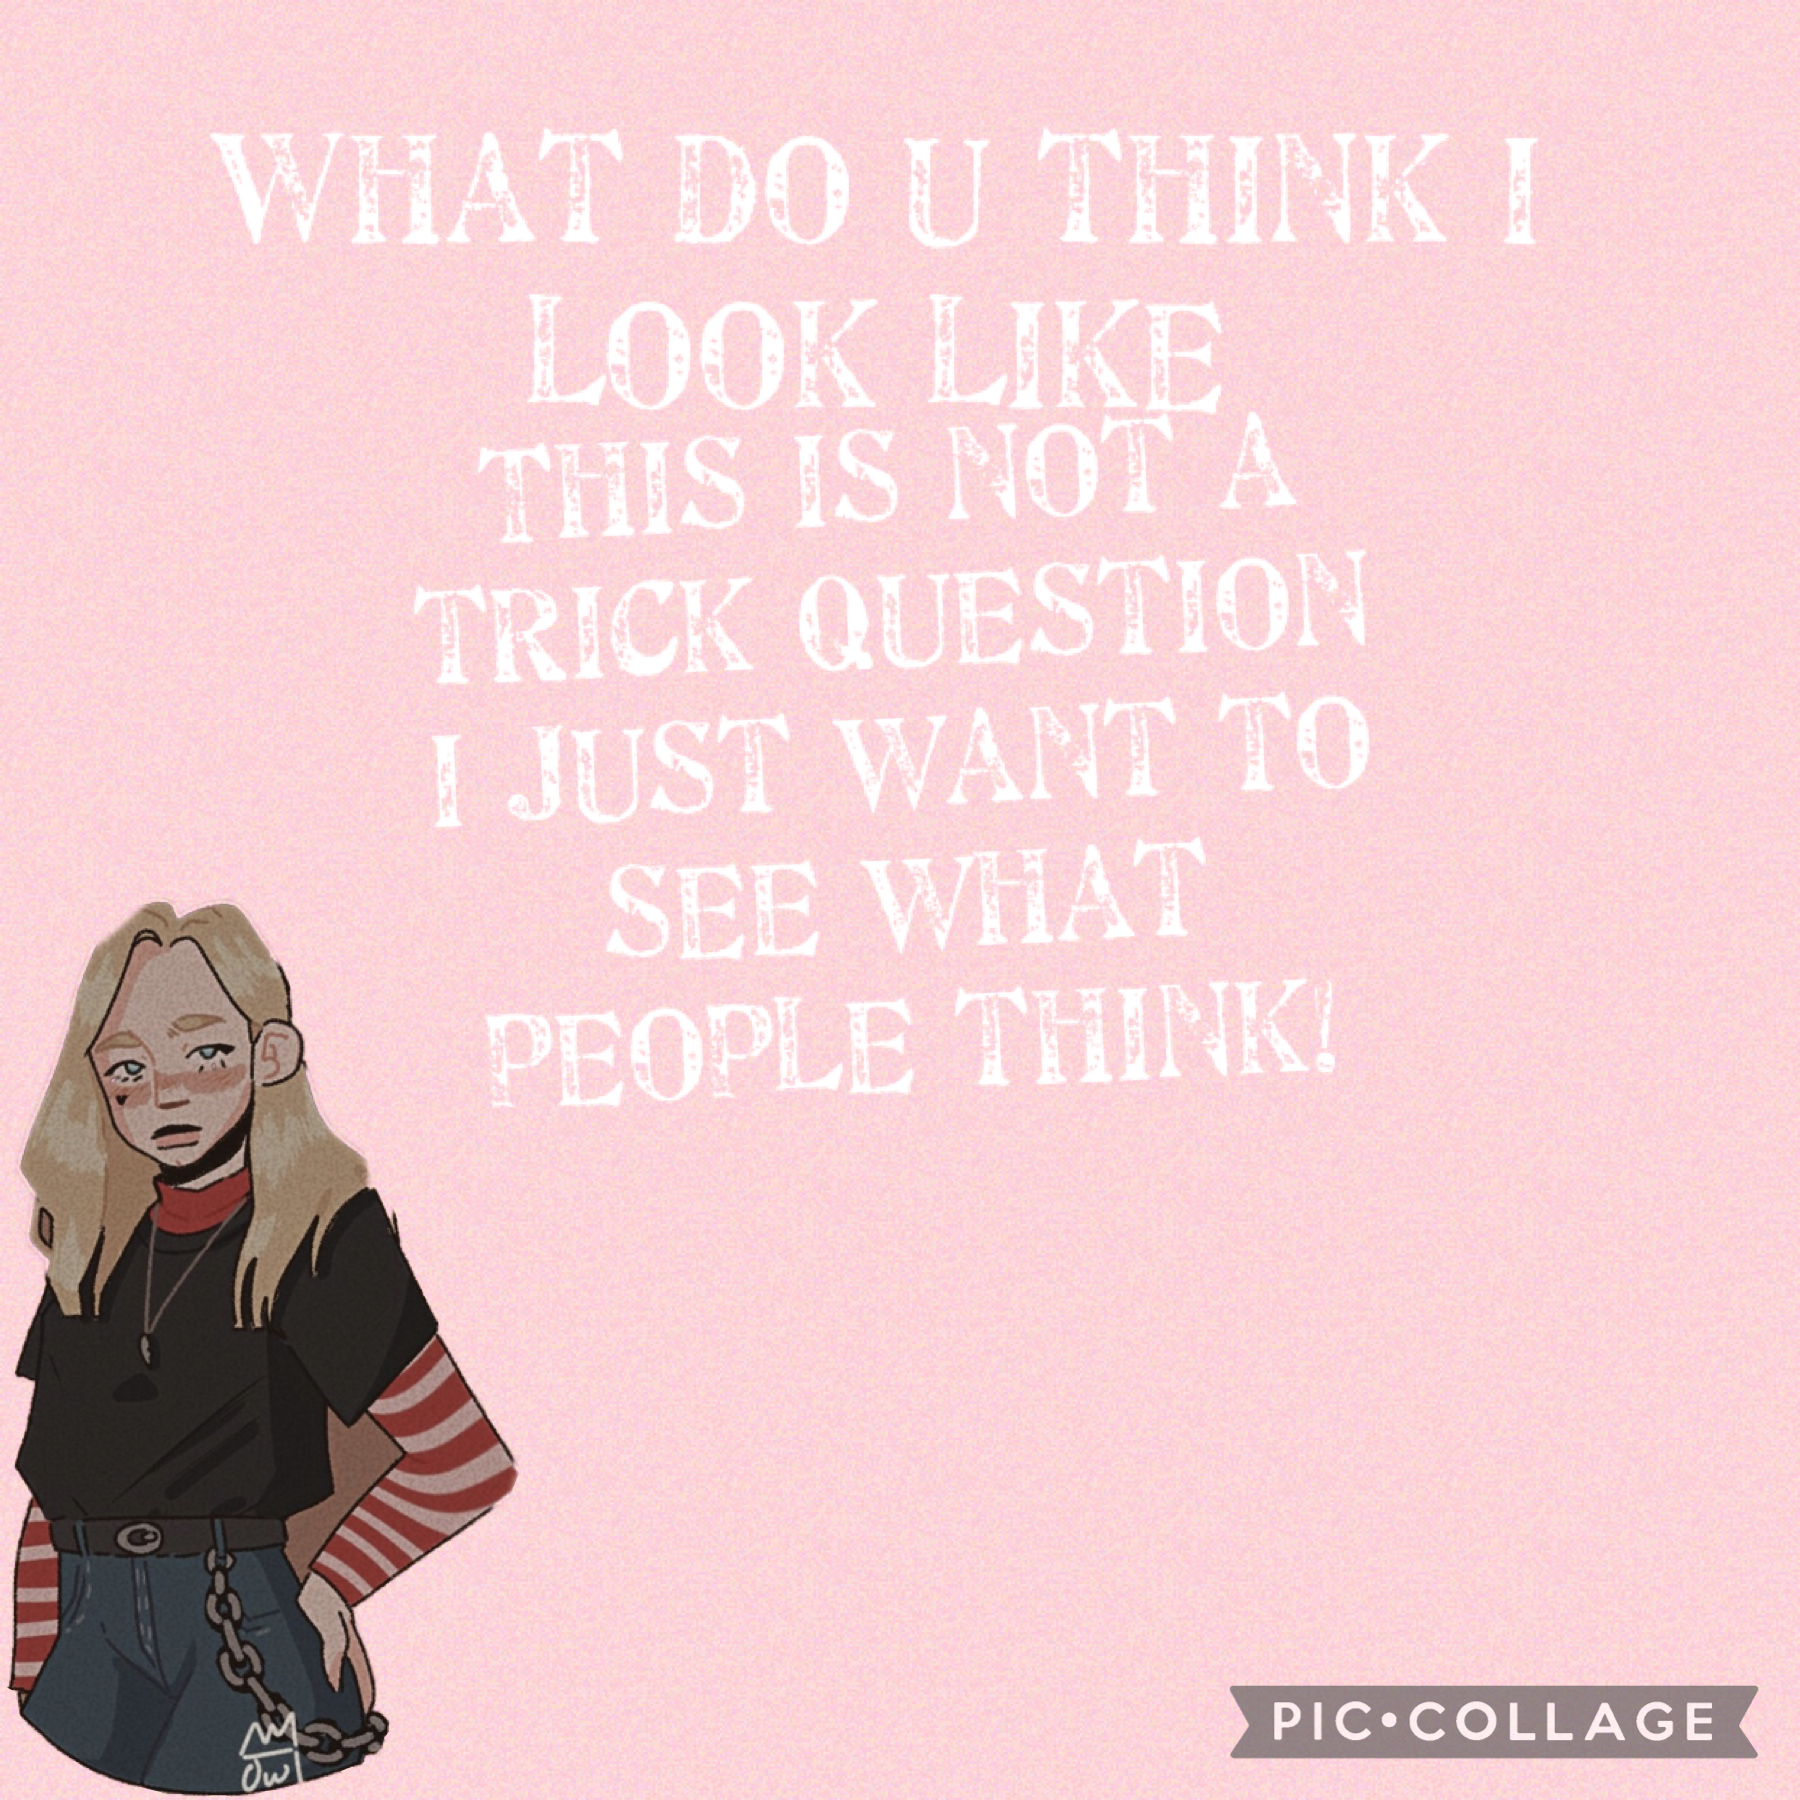 I just want to see what u think!